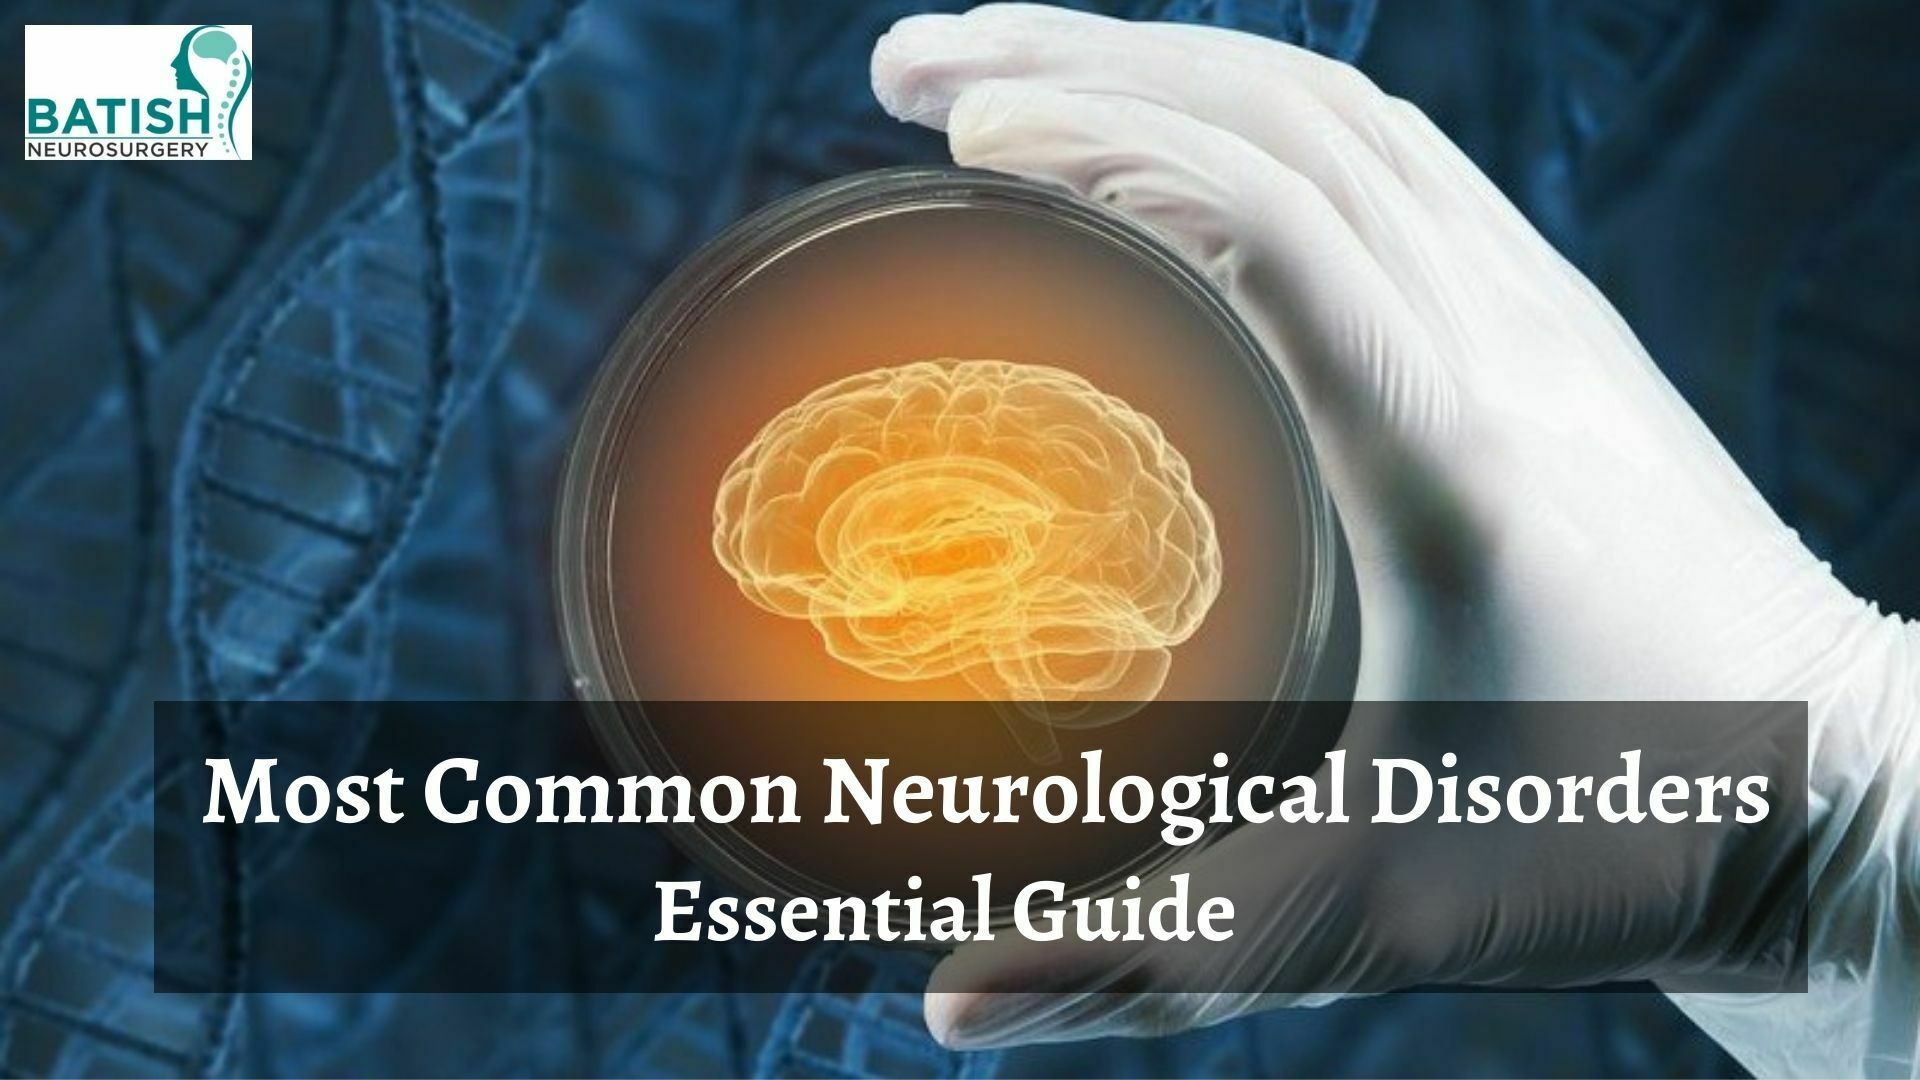 Most Common Neurological Disorders: Essential Guide